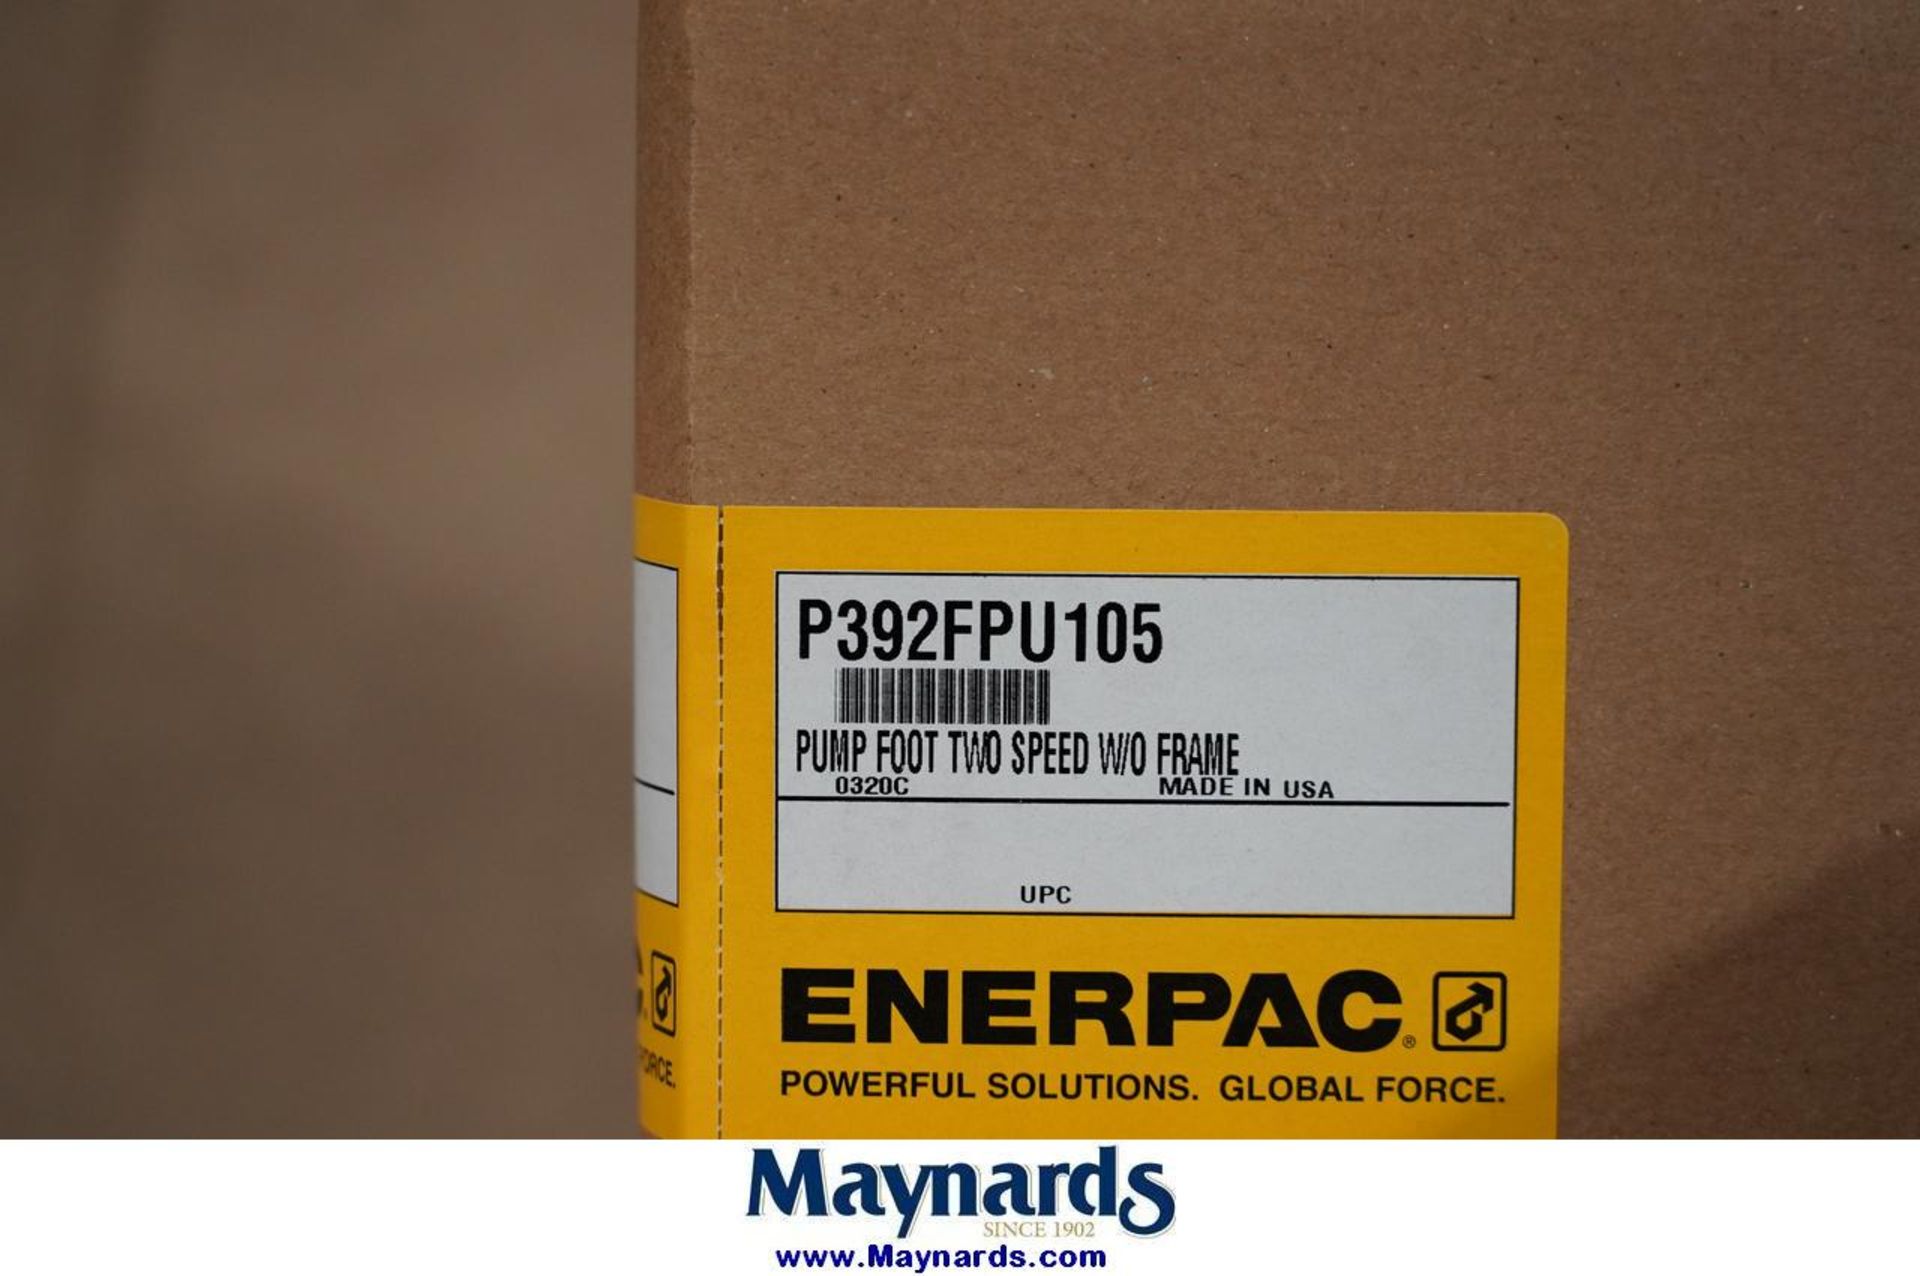 Enerpac P392FPU105 Two Speed Foot Pump - Image 3 of 3